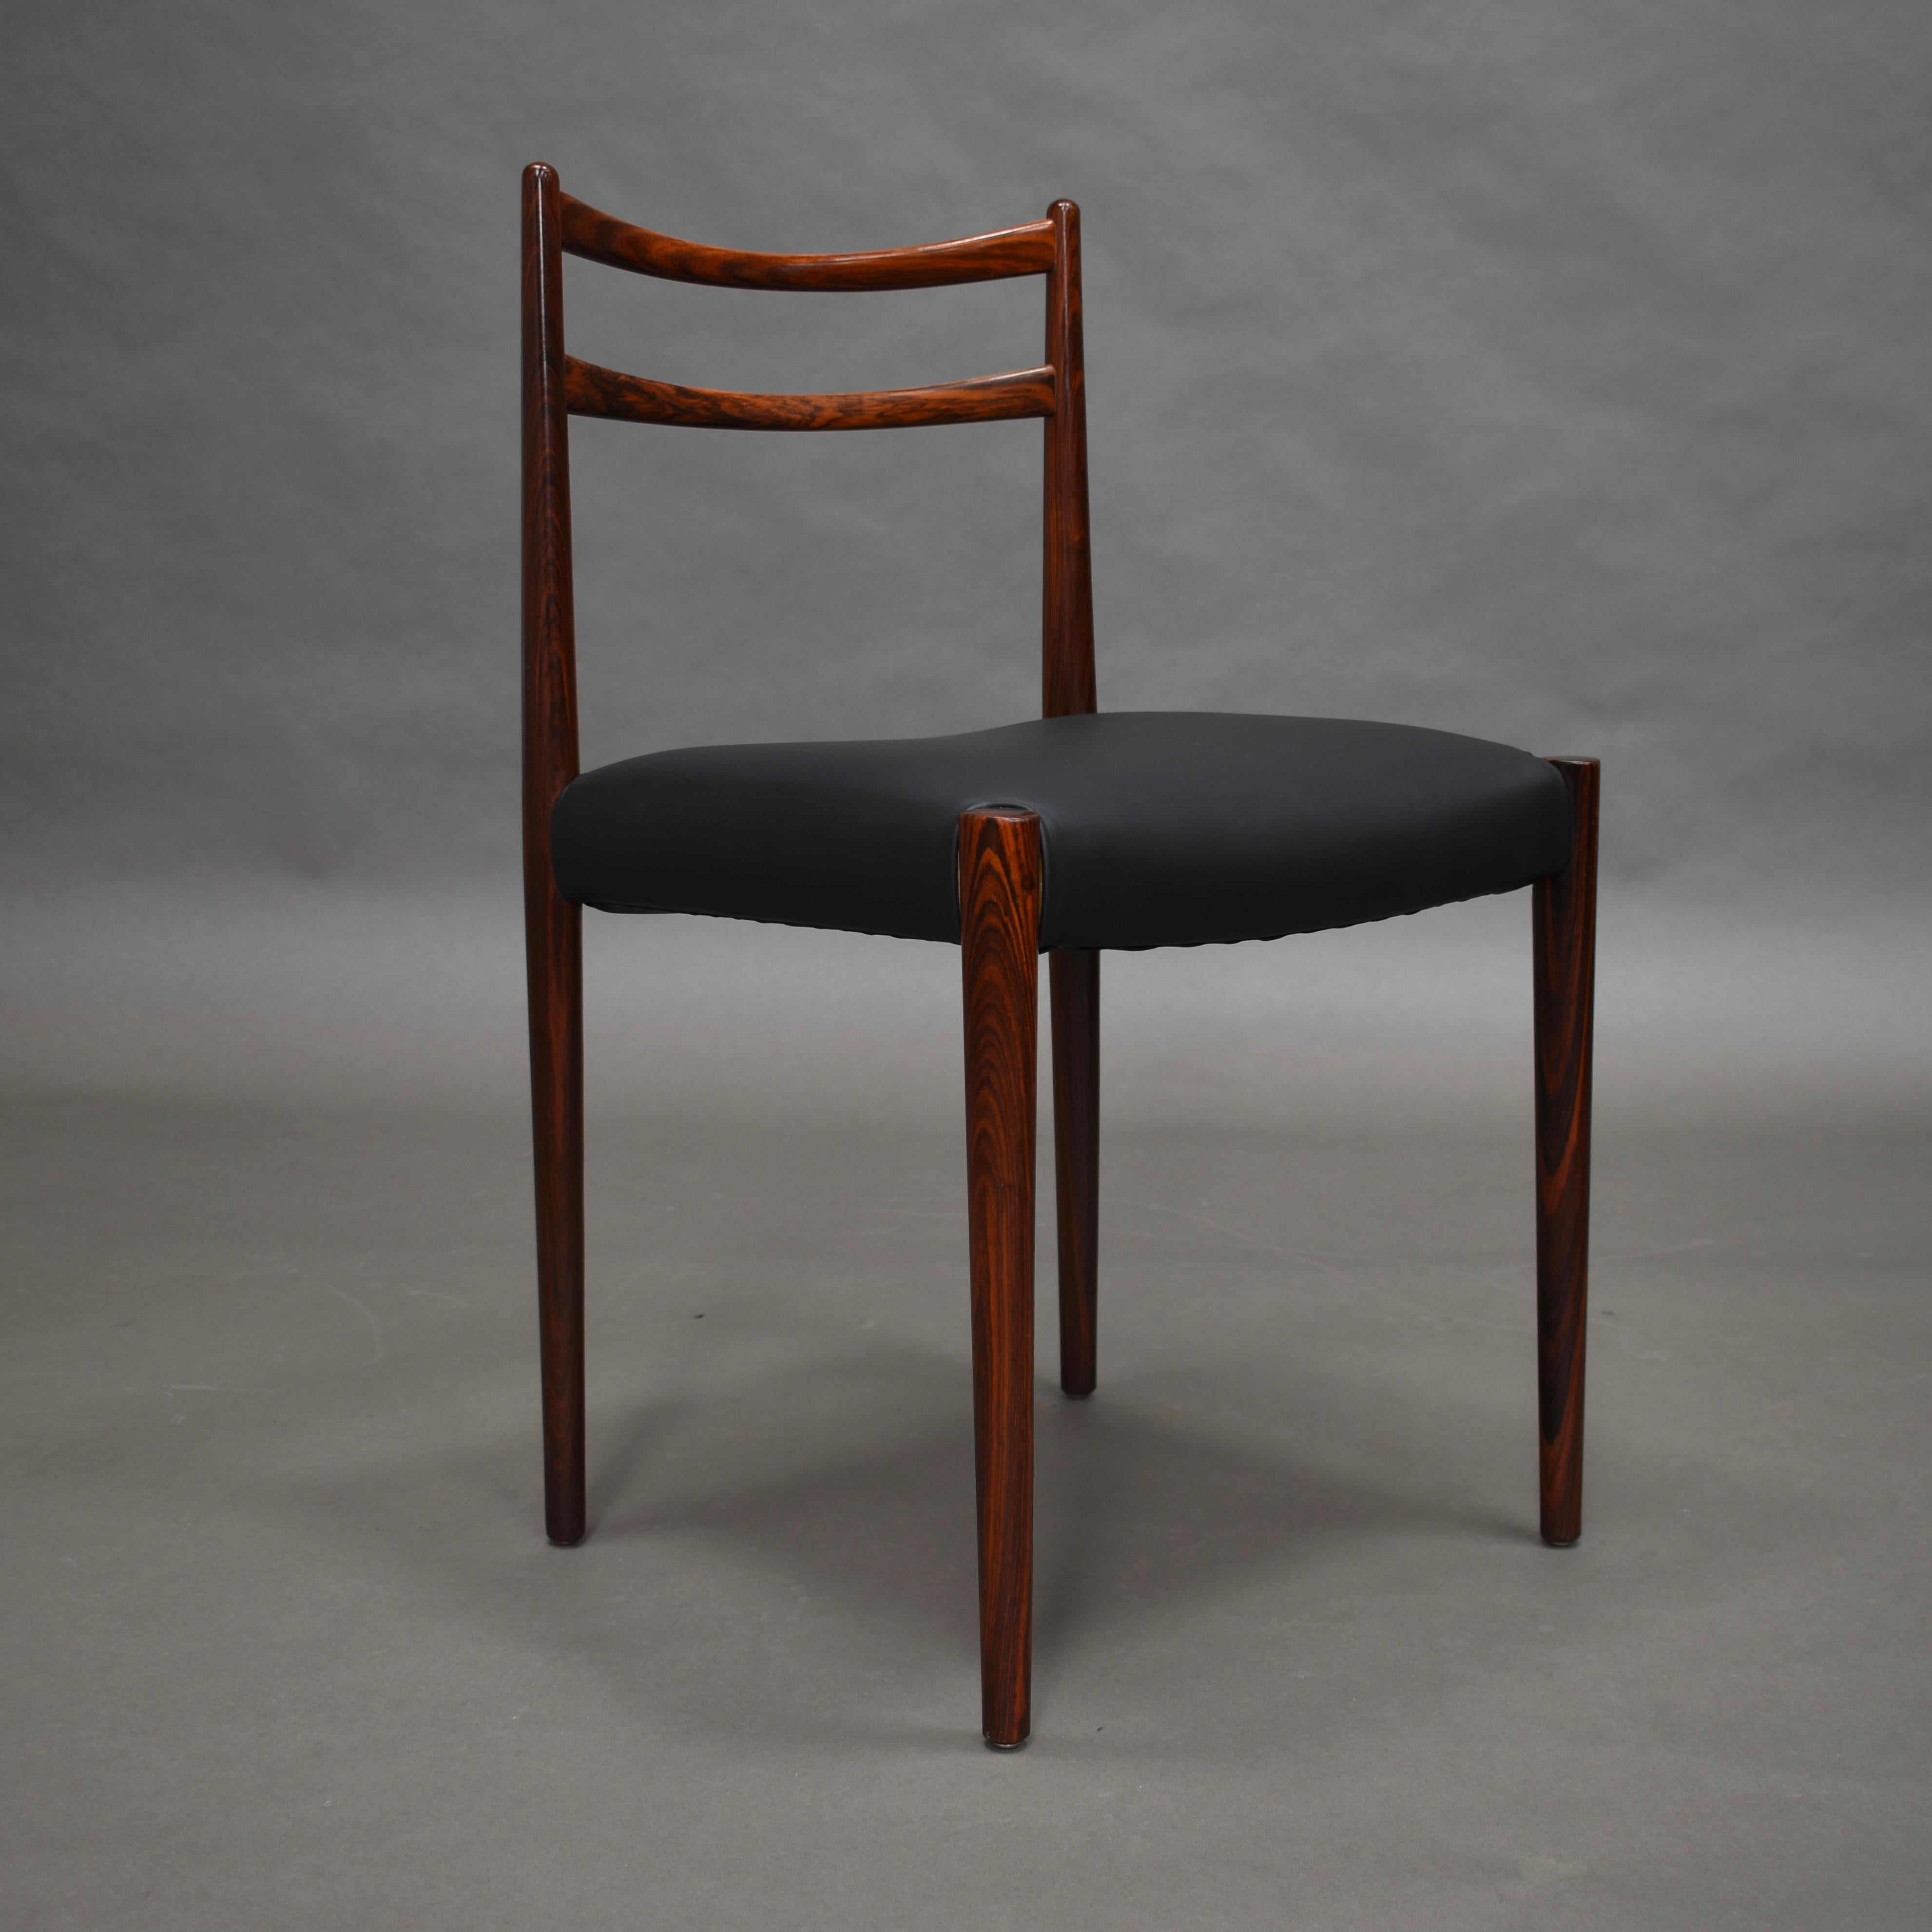 Danish Brazilian Rosewood Dining Chairs in New Black Leather, Denmark, 1950s 1